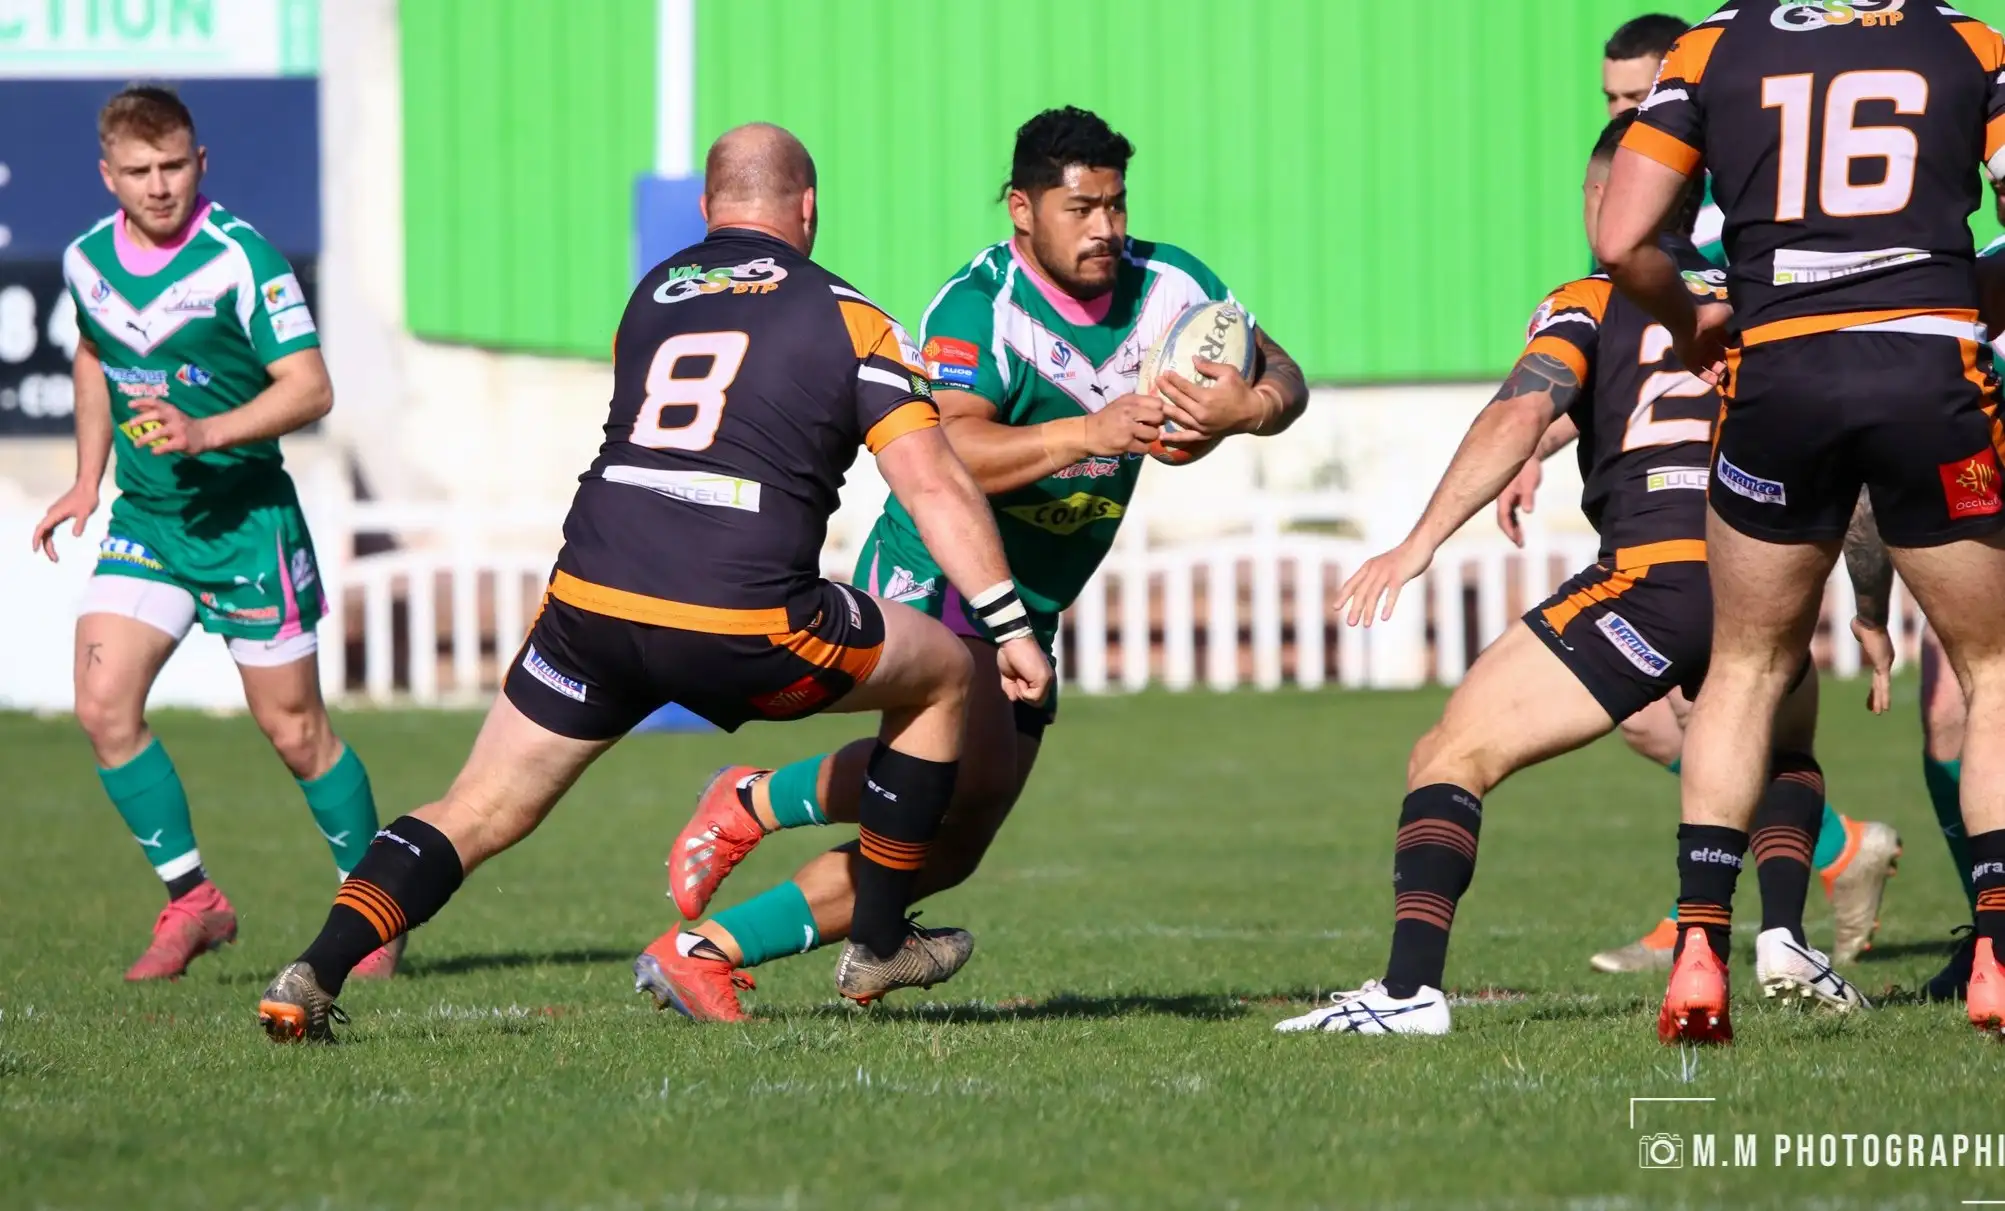 French round-up: Limoux march on, Toulouse points deduction & Villefranche reach cup final